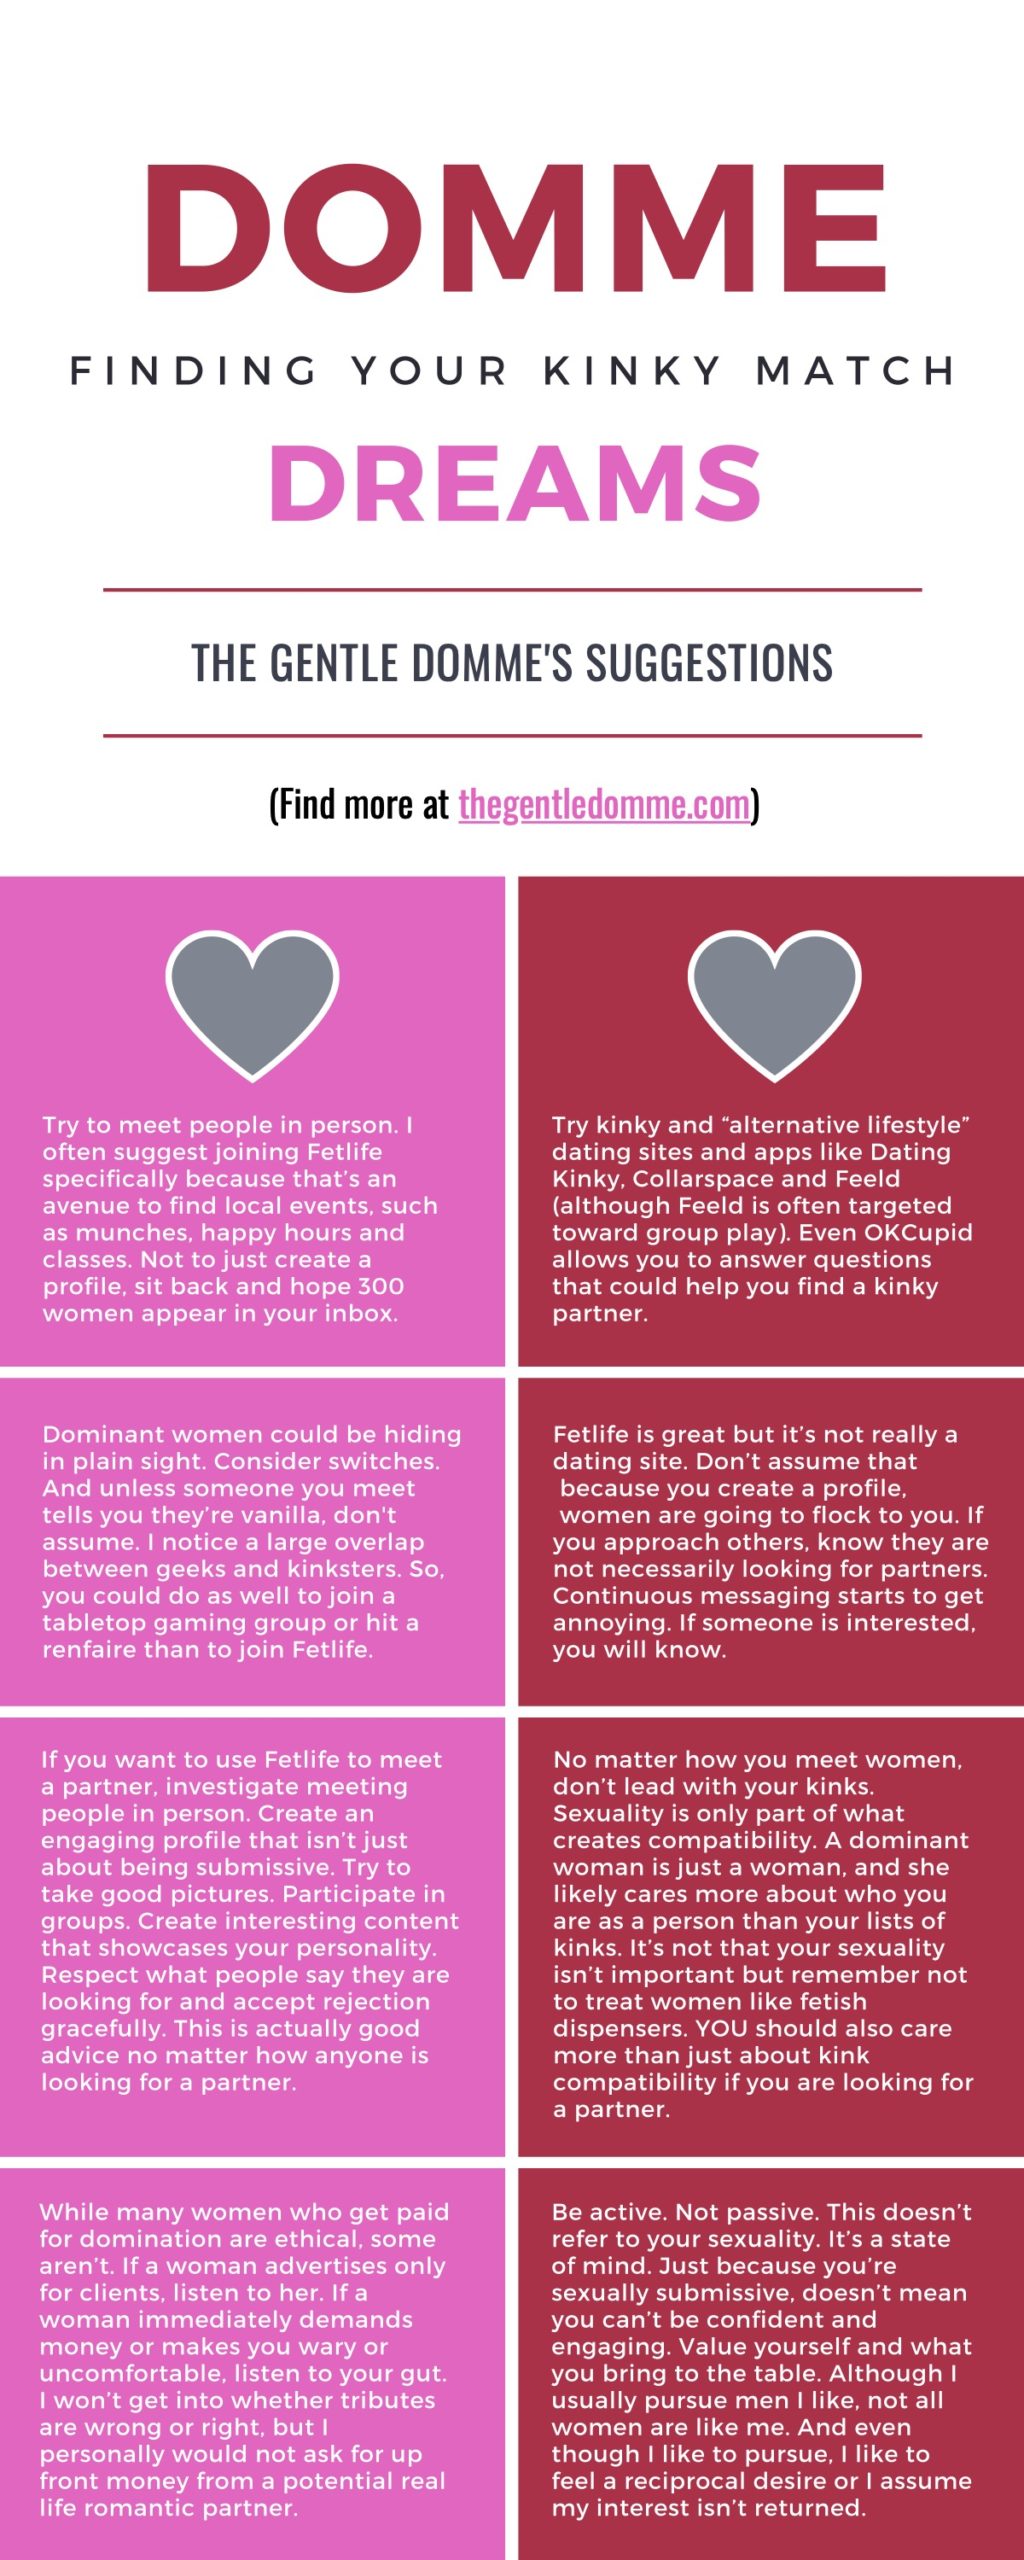 An infographic with 8 pieces of femdom dating advice for submissive men to find the domme of their dreams